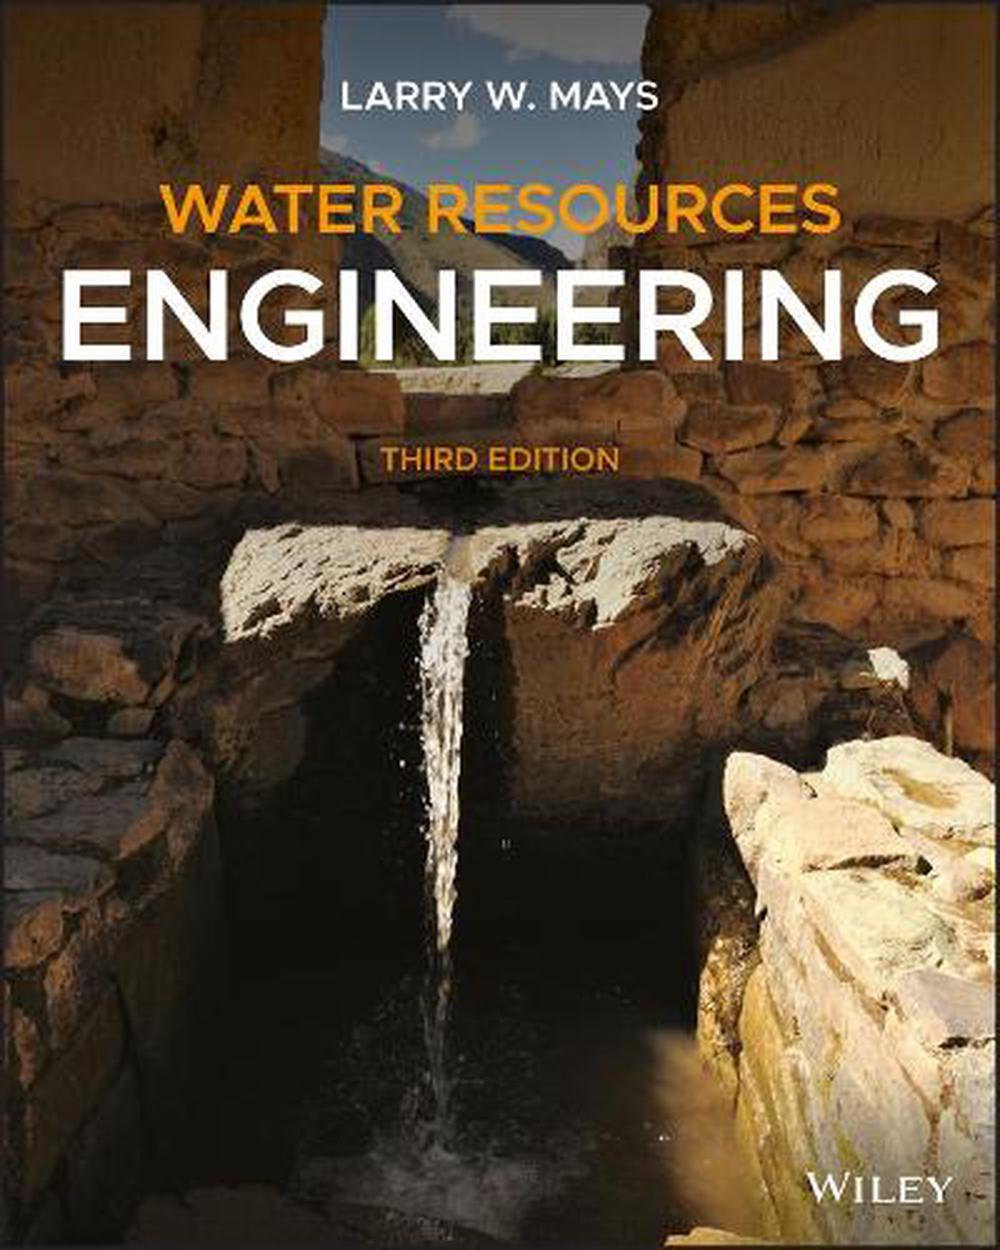 Water Resources Engineering by Larry W. Mays Paperback Book Free